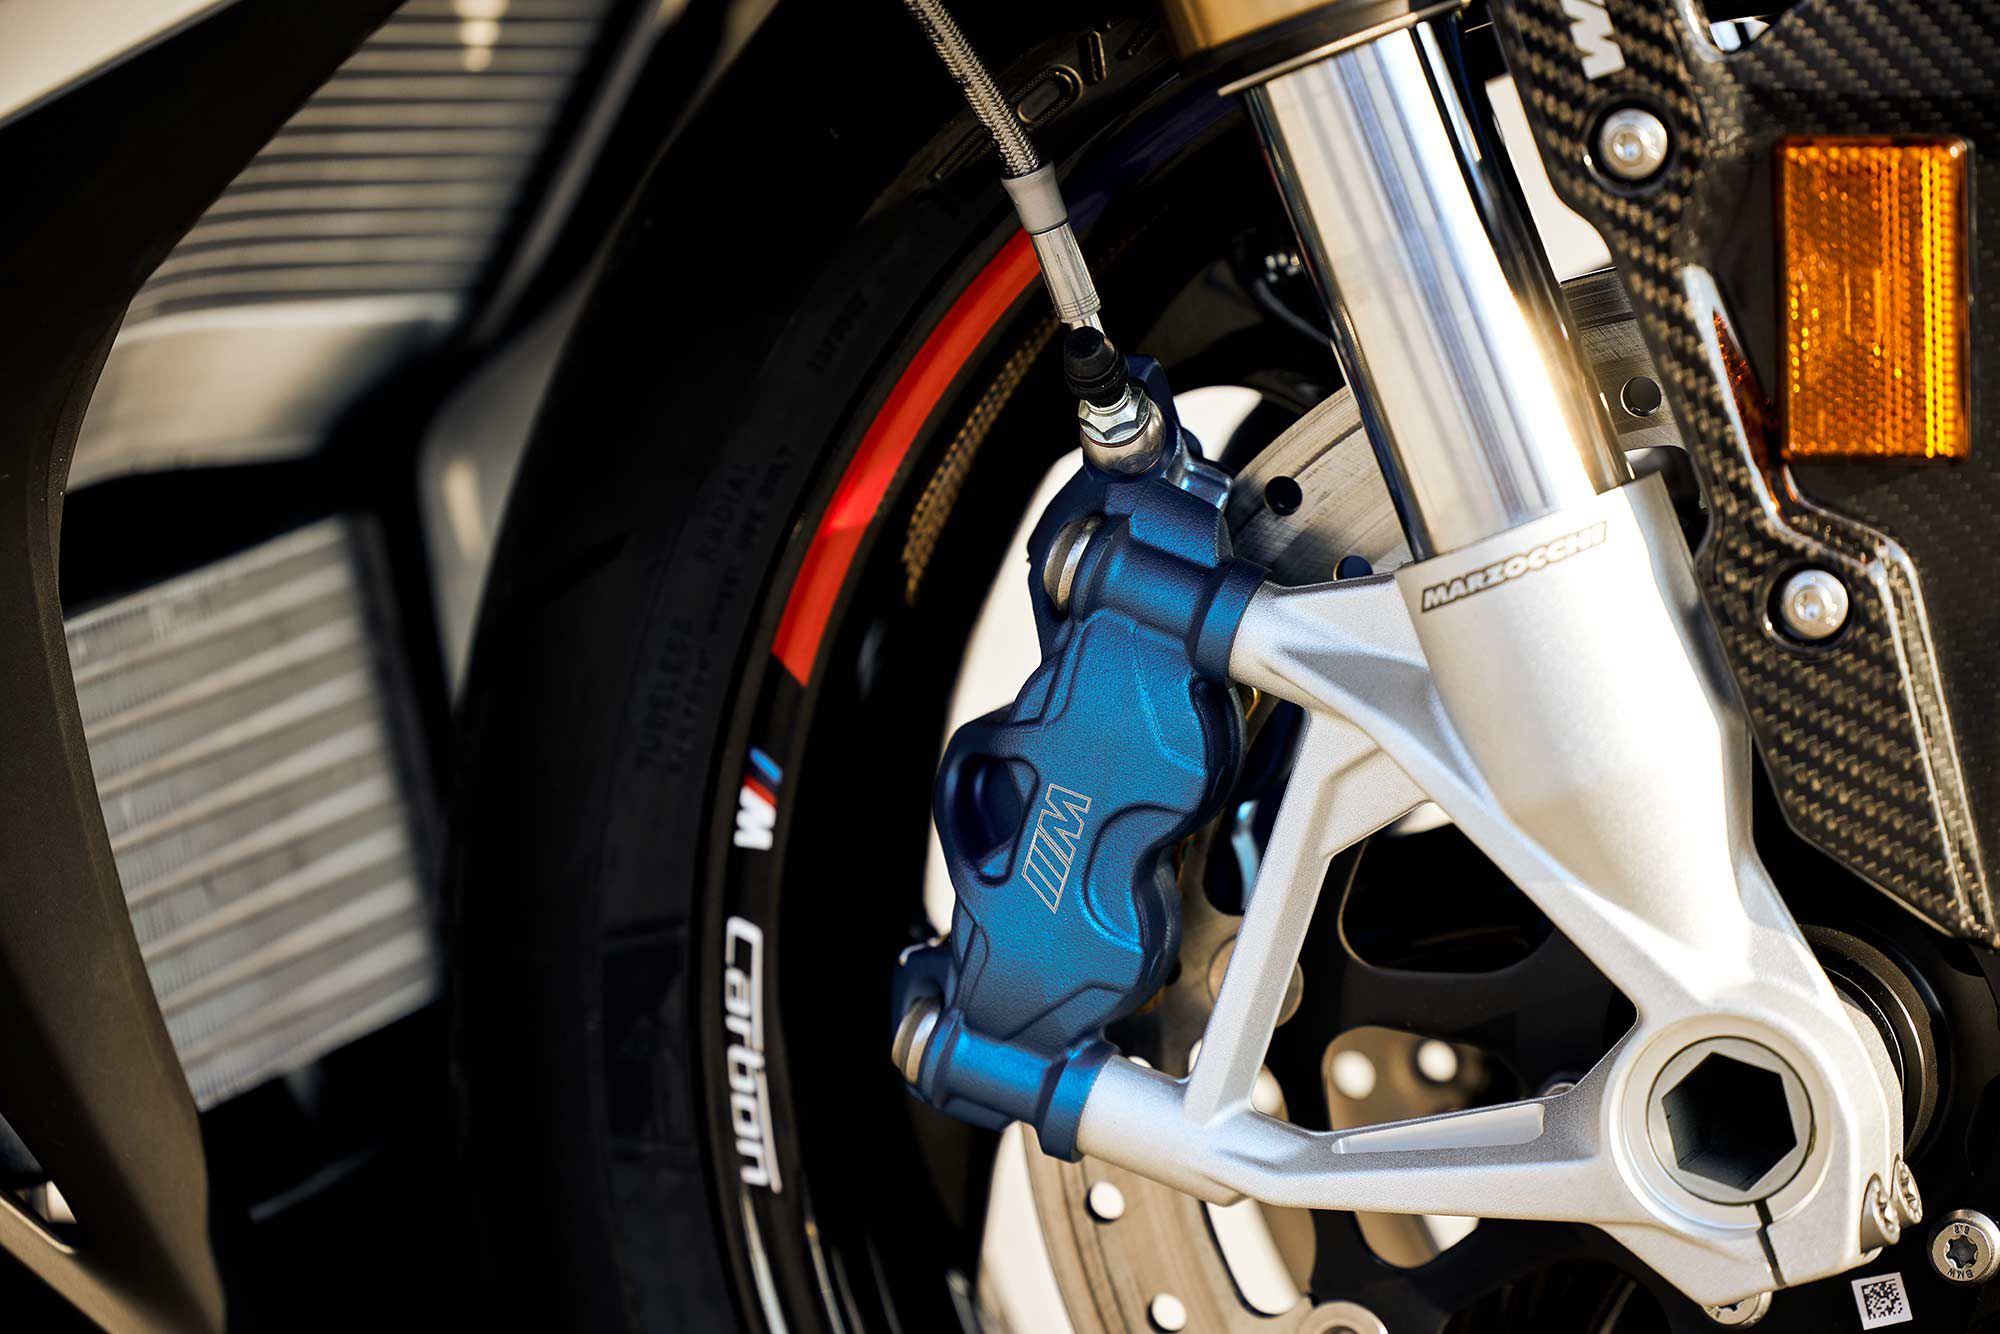 Braking has always been one of the S 1000 RR’s strong suits.